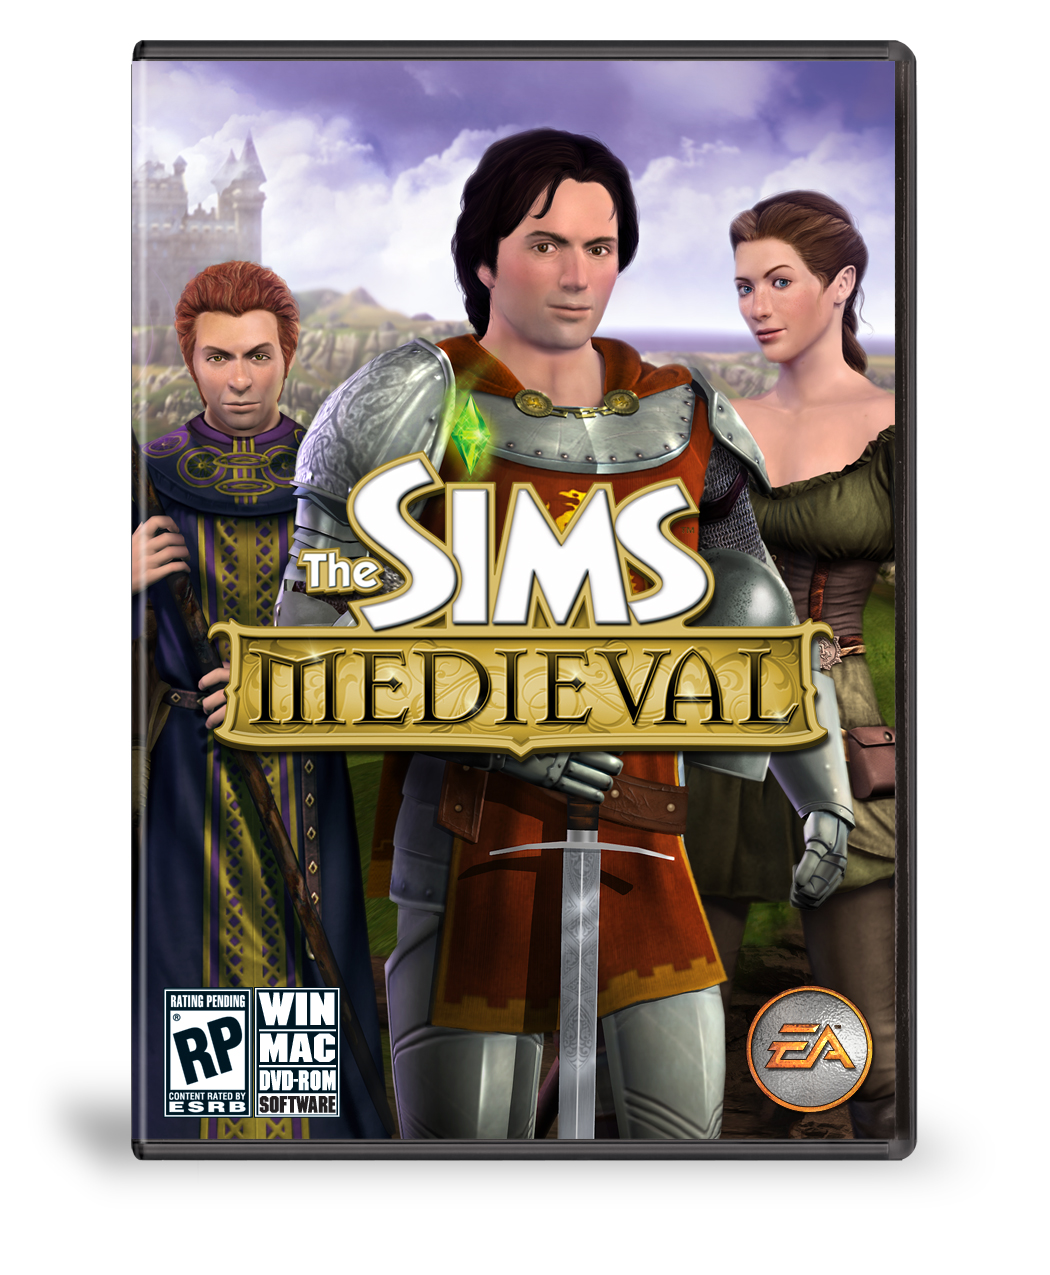 the sims medieval download free full version